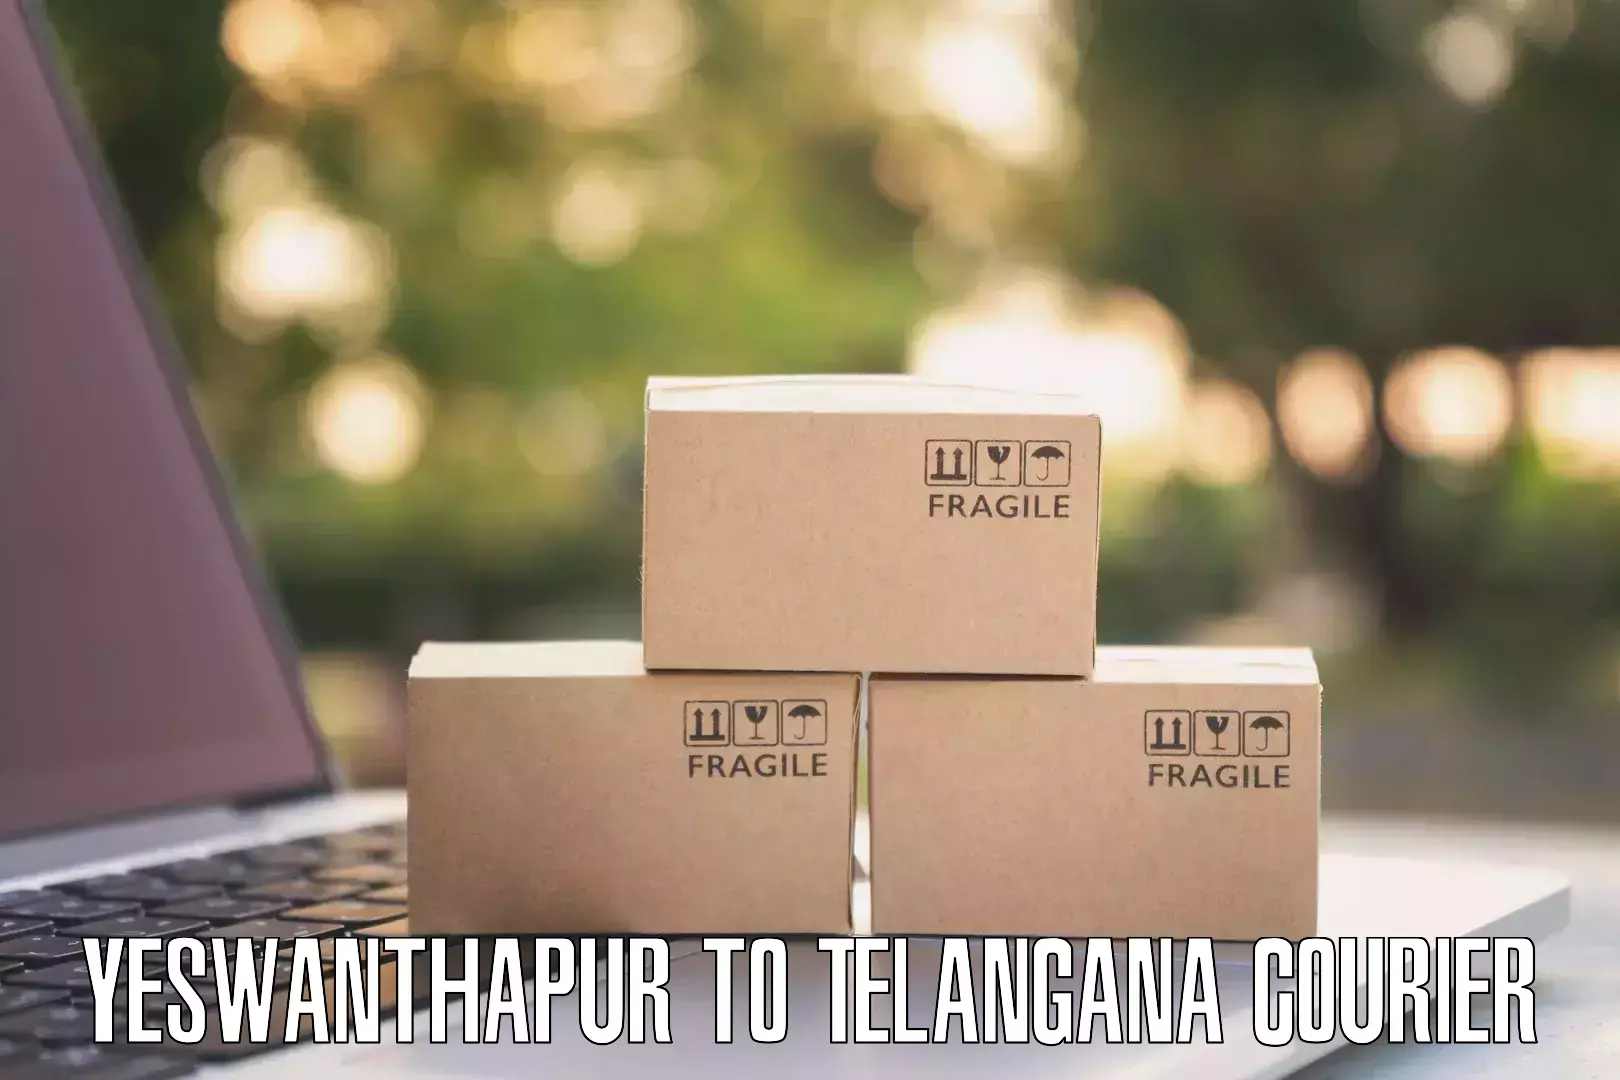 Supply chain efficiency Yeswanthapur to Telangana